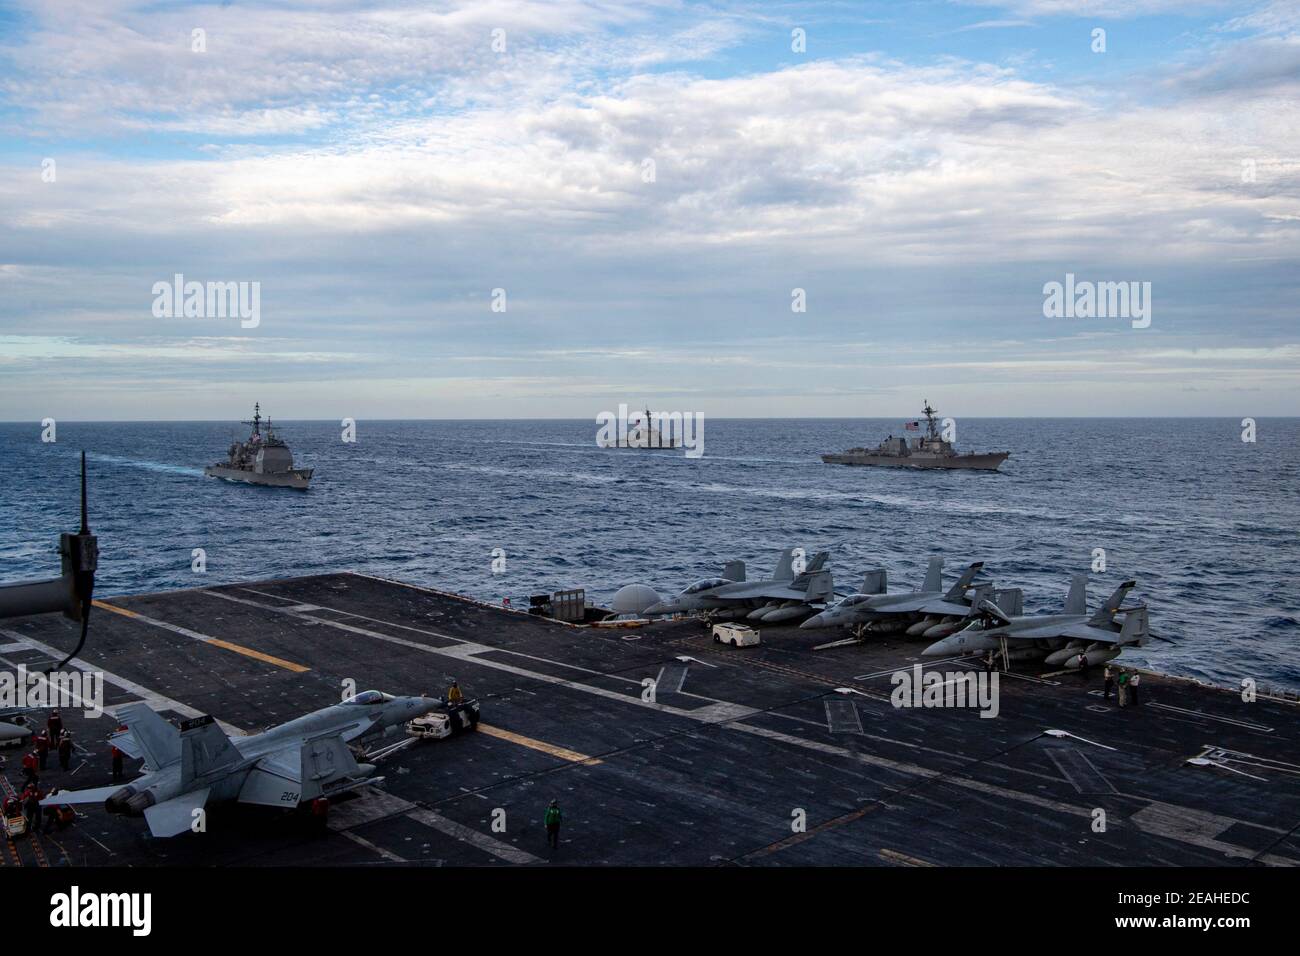 Handout photo of – The Theodore Roosevelt Carrier Strike Group transits in formation with the Nimitz Carrier Strike Group in the South China Sea February 9, 2021. Two US Navy aircraft carrier strike groups began operations in the disputed waters of the South China Sea on Tuesday, the latest show of naval capabilities by the Biden administration as it pledges to stand firm against Chinese territorial claims.The carriers USS Theodore Roosevelt and USS Nimitz and their accompanying guided-missile cruisers and destroyers are showing the US Navy's ability to operate in highly trafficked, challengin Stock Photo